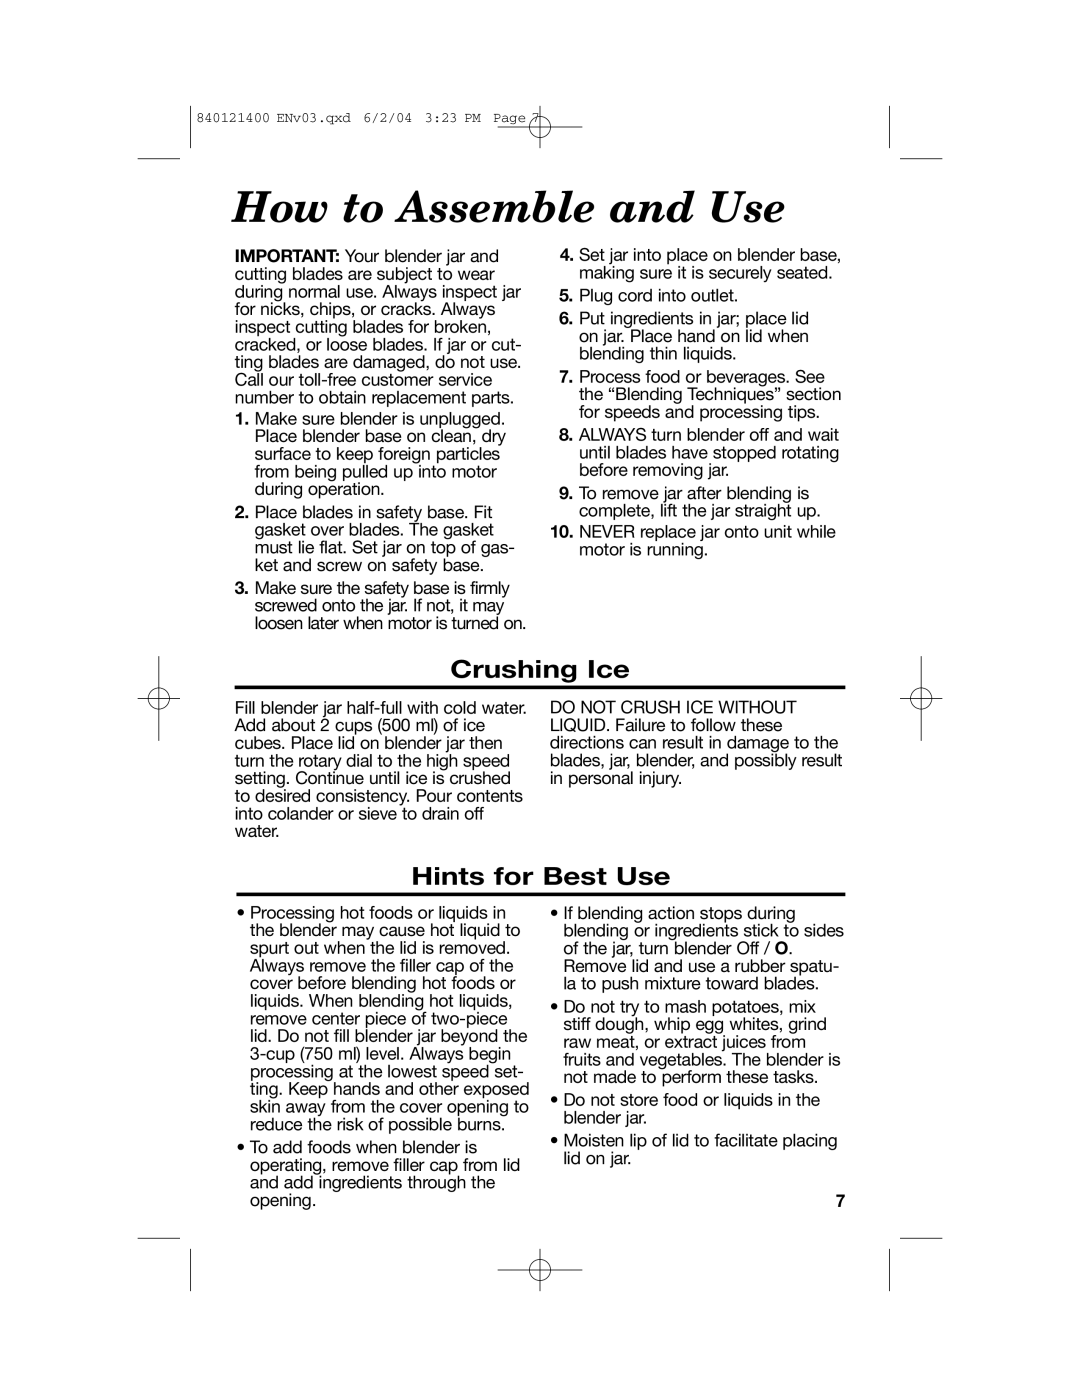 Hamilton Beach All-Metal Blender manual How to Assemble and Use, Crushing Ice, Hints for Best Use 